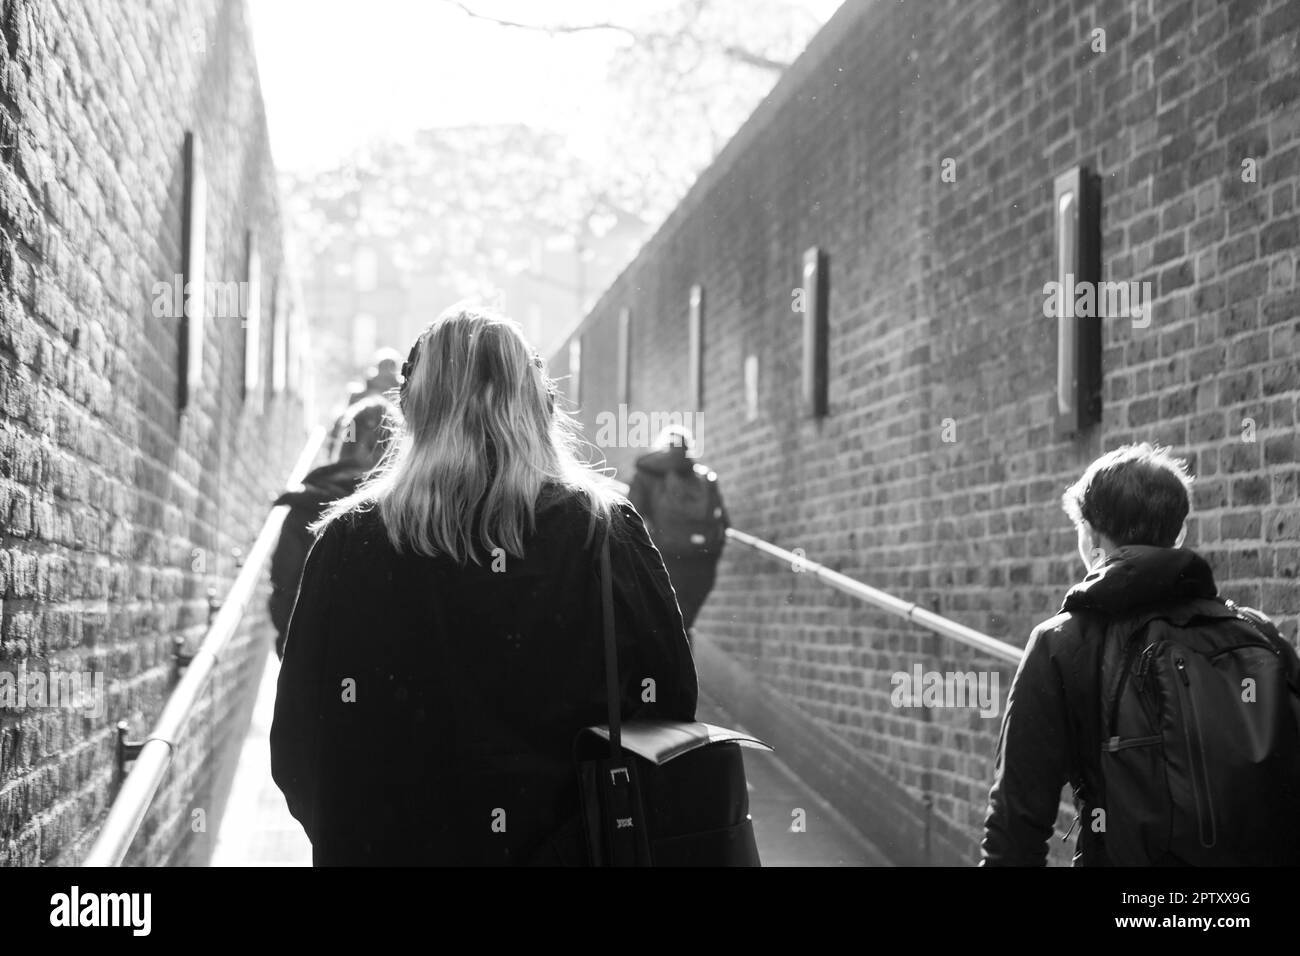 London, UK, 25 April 2023: At Pimlico tube station people walk up the ramp to exit the station on their way to work or school. Sunshine beams down on them and spring leaves on a tree can be seen in the distance. Anna Watson/Alamy Stock Photo